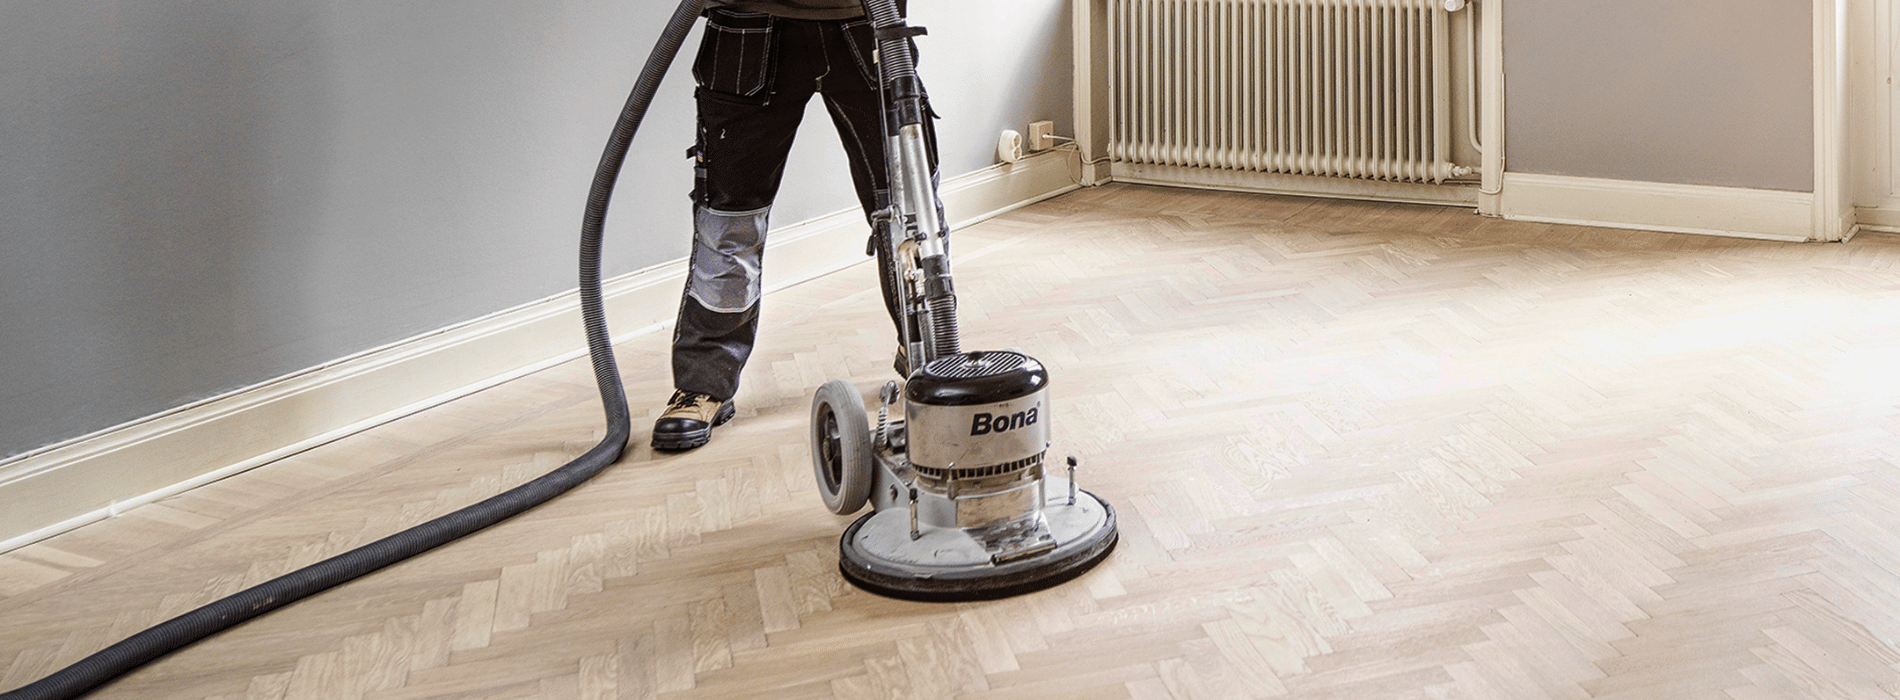 In Hounslow, TW3, Mr Sander® are using a Bona FlexiSand 1.9 buffer sander with Ø 407 mm dimension, 1.9 kW effect, 230 V voltage, and 50 Hz/60 Hz frequency. They connect it to a dust extraction system with a HEPA filter for clean and efficient results while sanding a parquet floor.